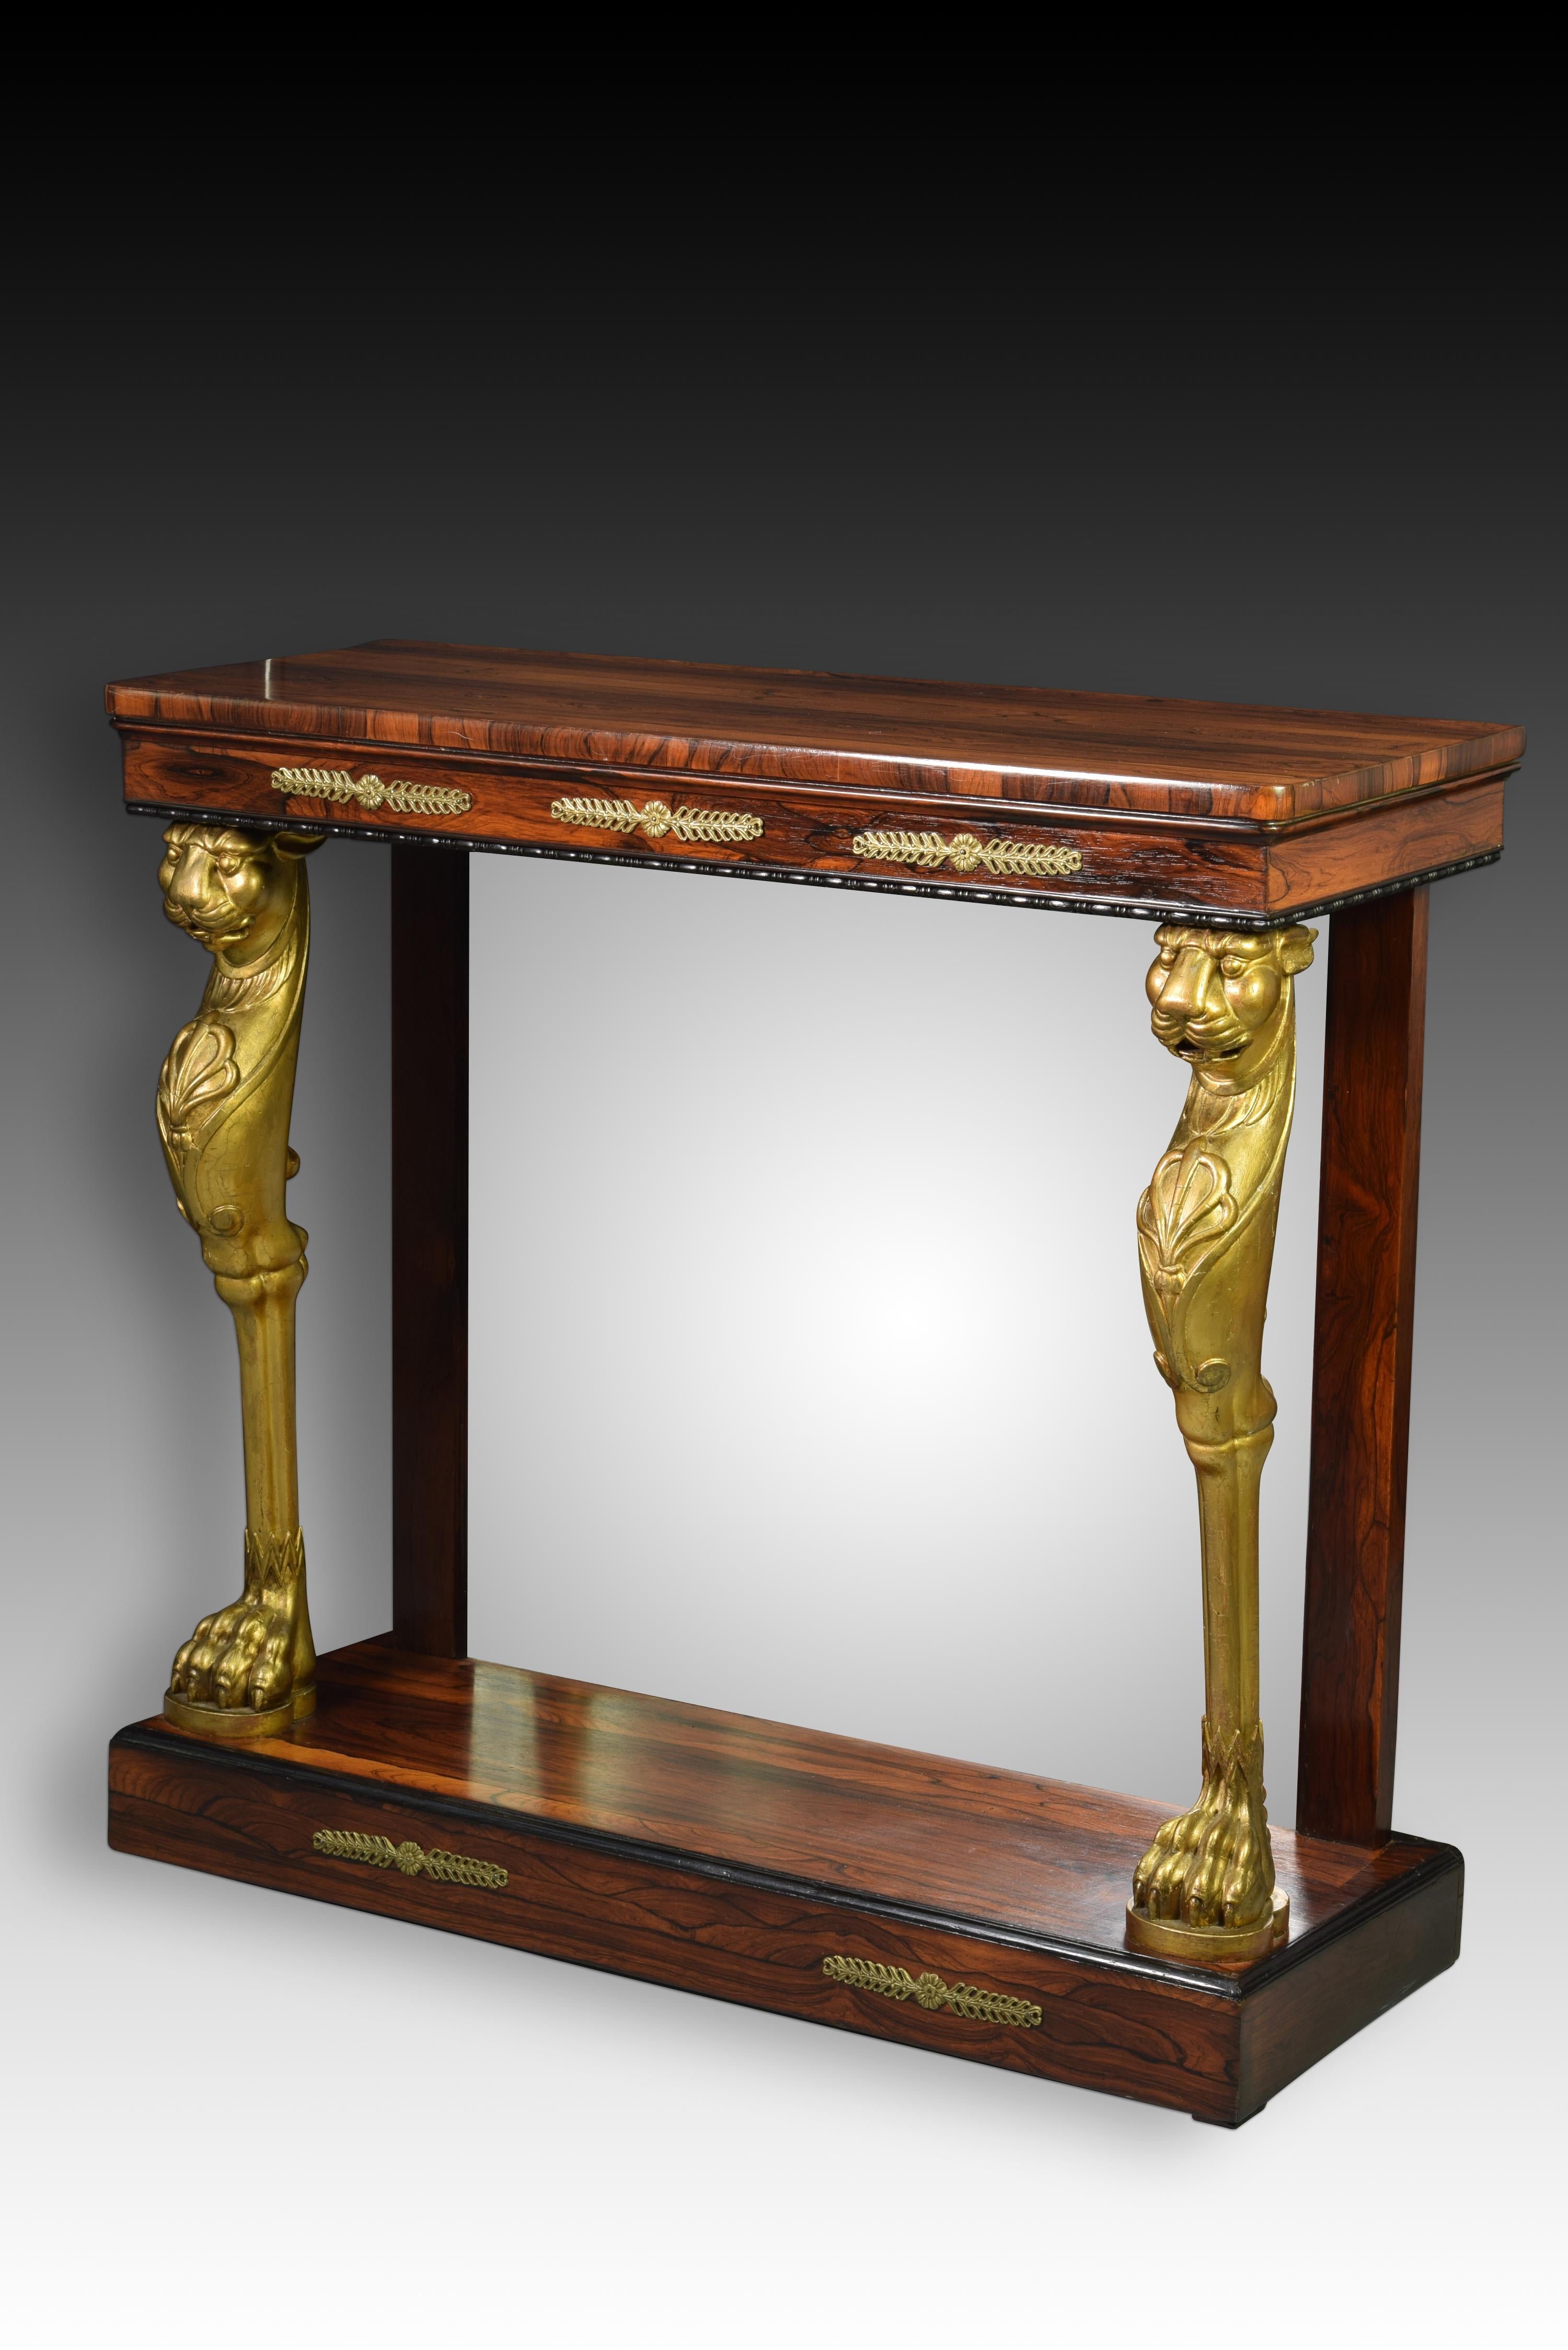 English Regency Console. Rosewood, gilded wood, bronze, mirror. First half of the 19th century. 
Console with a rectangular top with softened edges made of wood that has a waist decorated with gilt bronzes and a band of black architectural